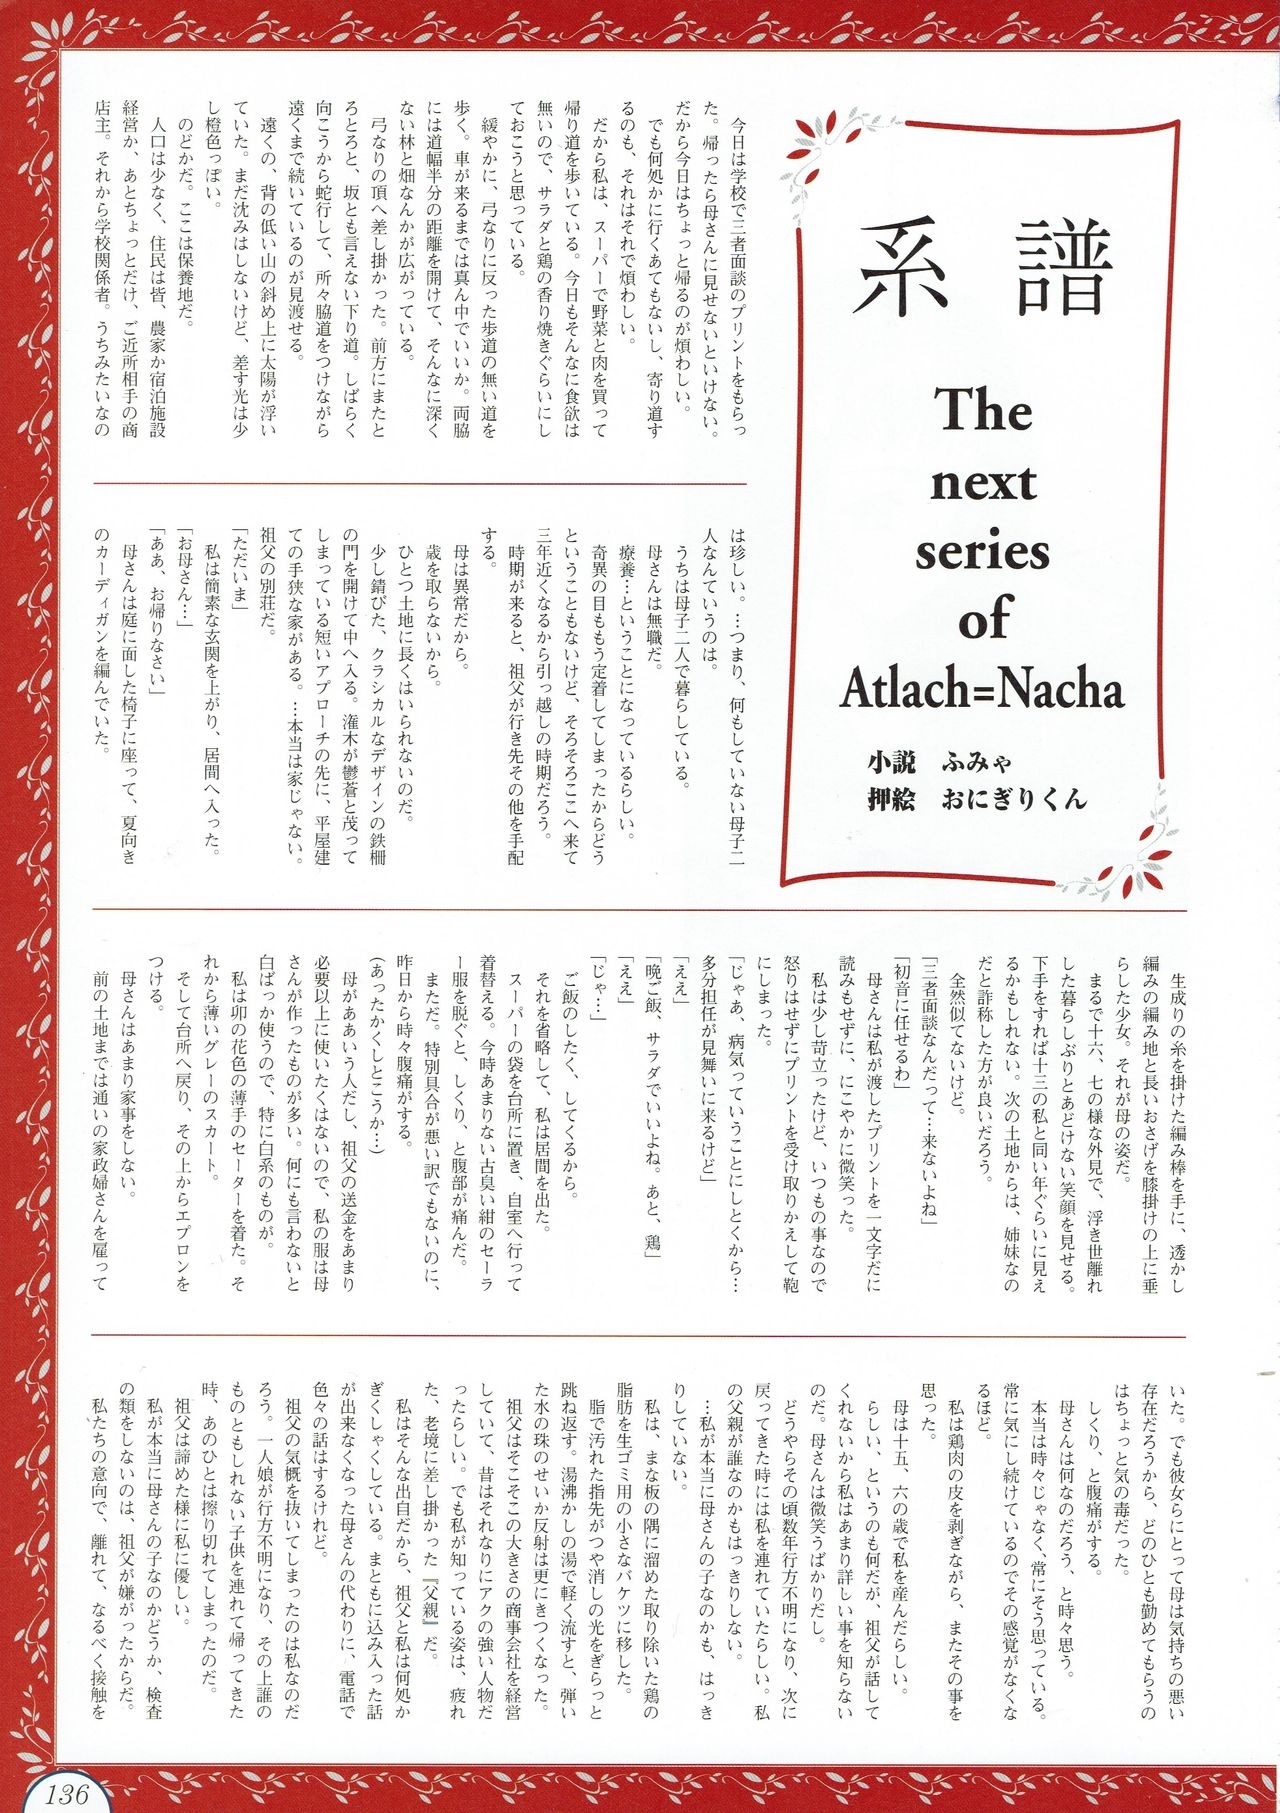 Alice no Yakata 456 Official Guide 137